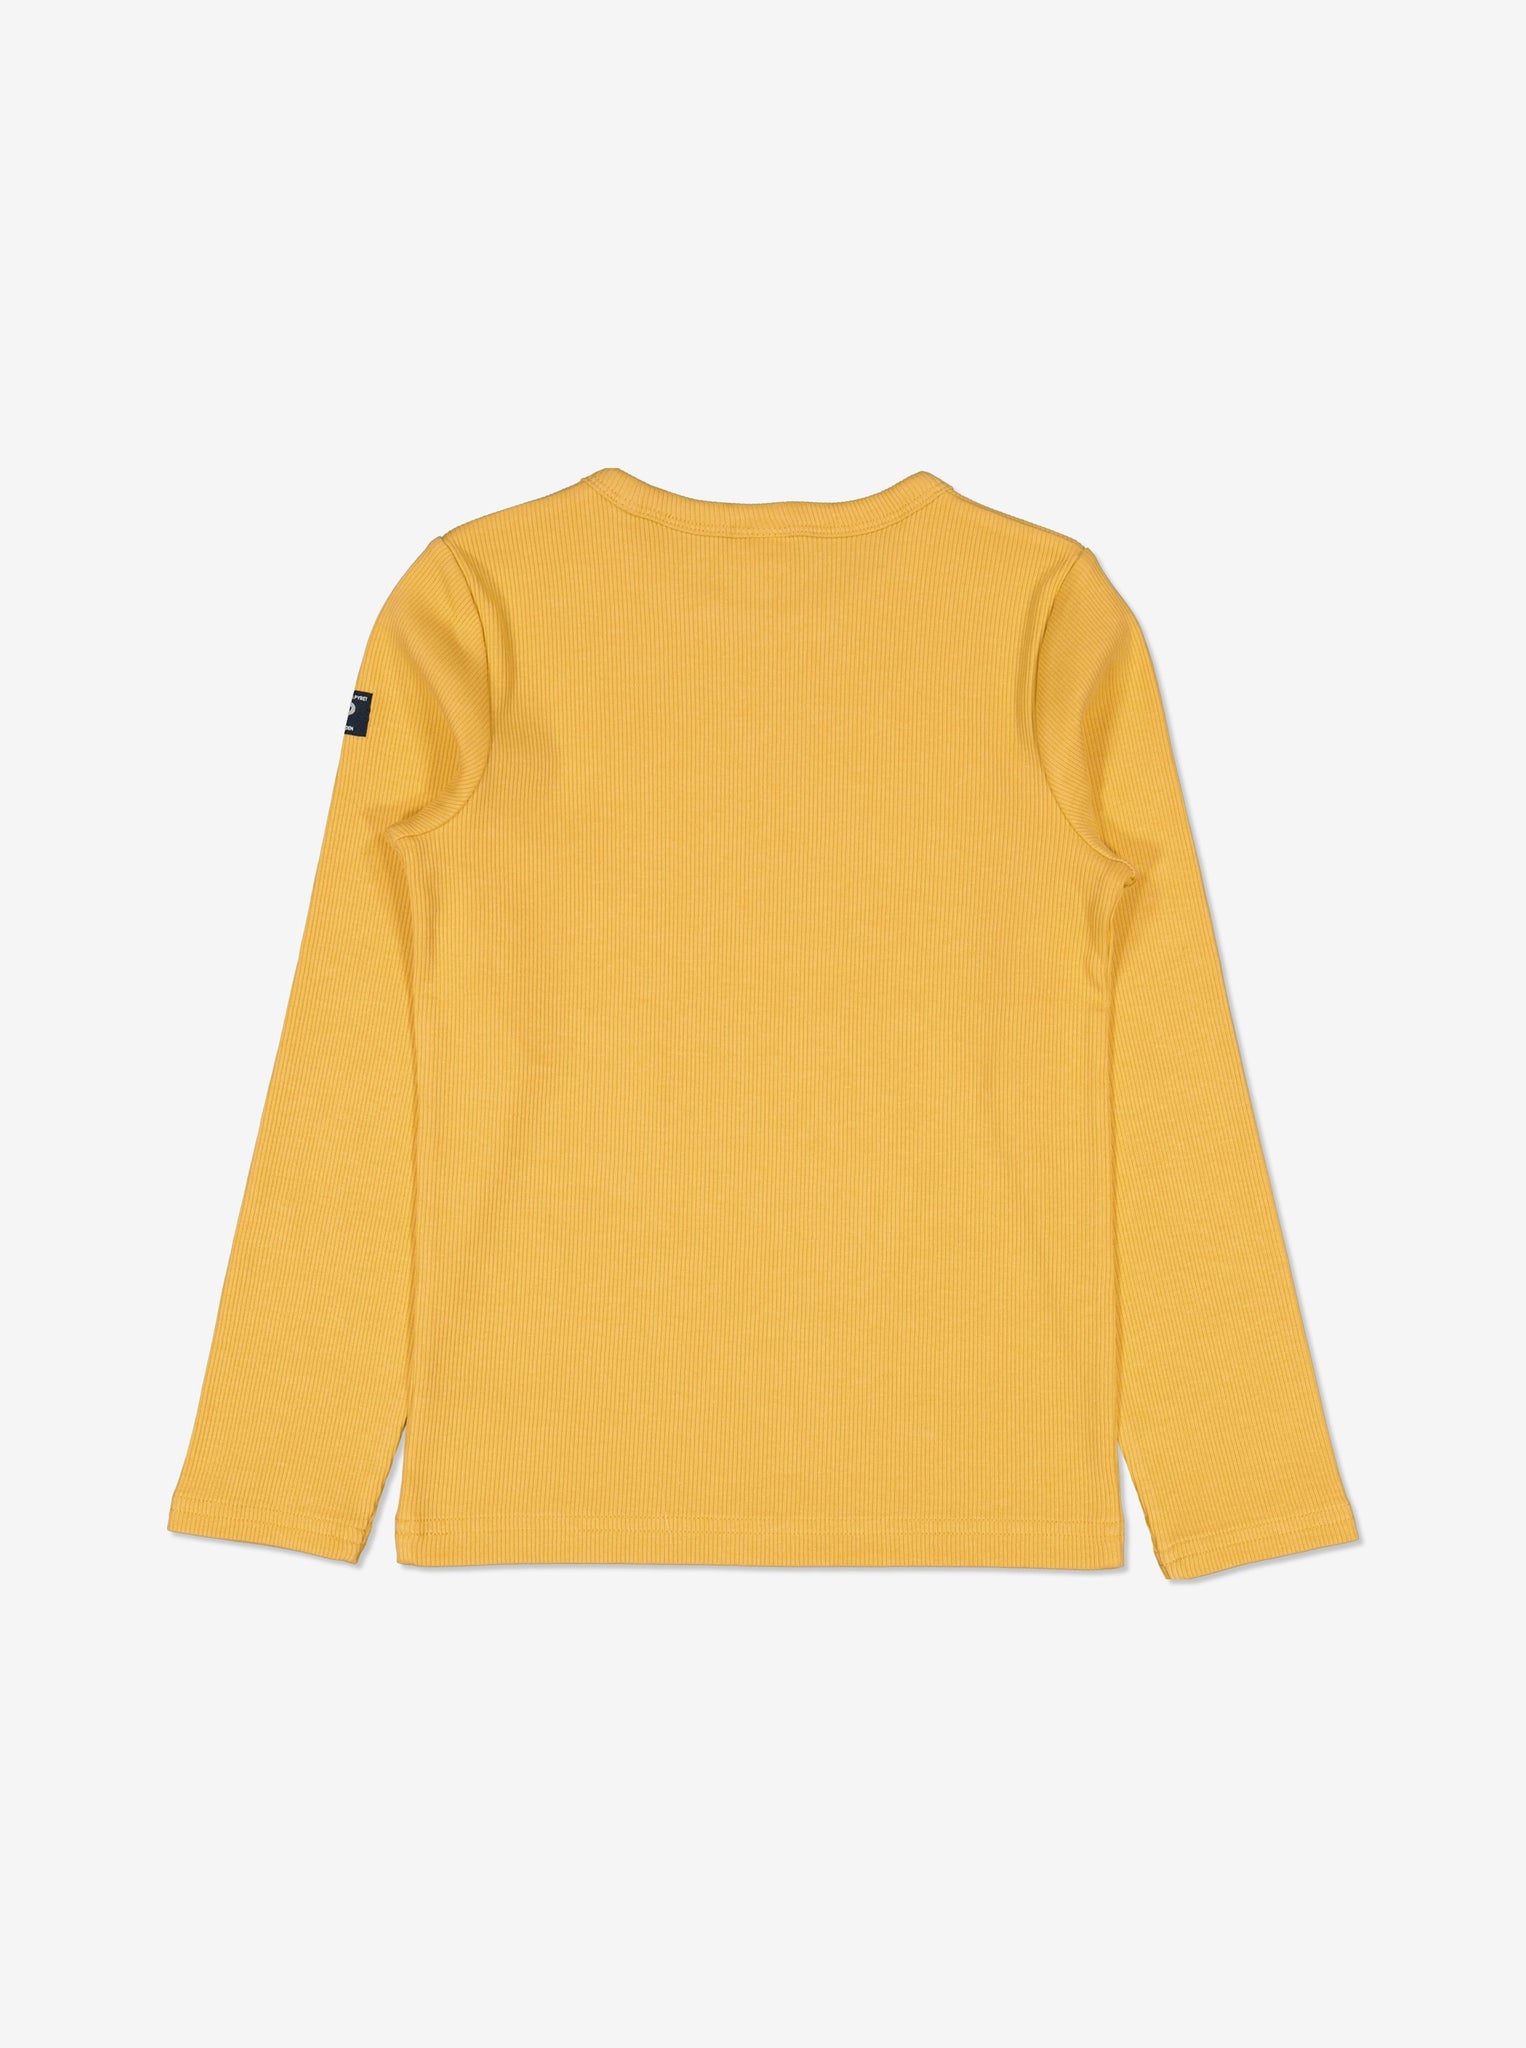  Organic Yellow Kids Top from Polarn O. Pyret Kidswear. Made from sustainable materials.